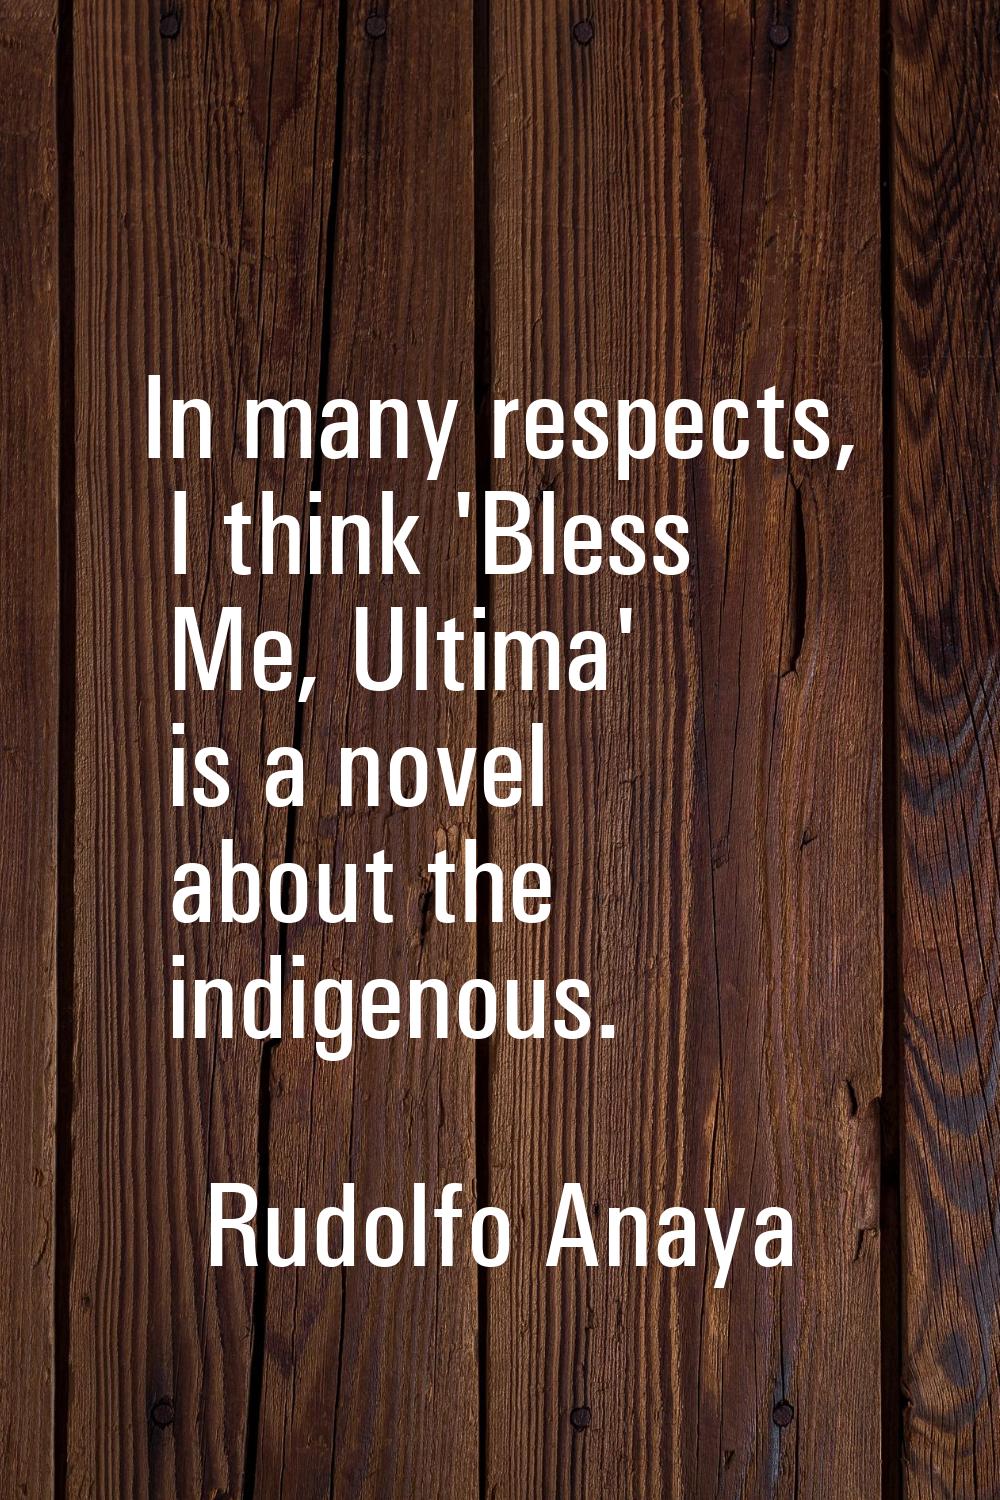 In many respects, I think 'Bless Me, Ultima' is a novel about the indigenous.